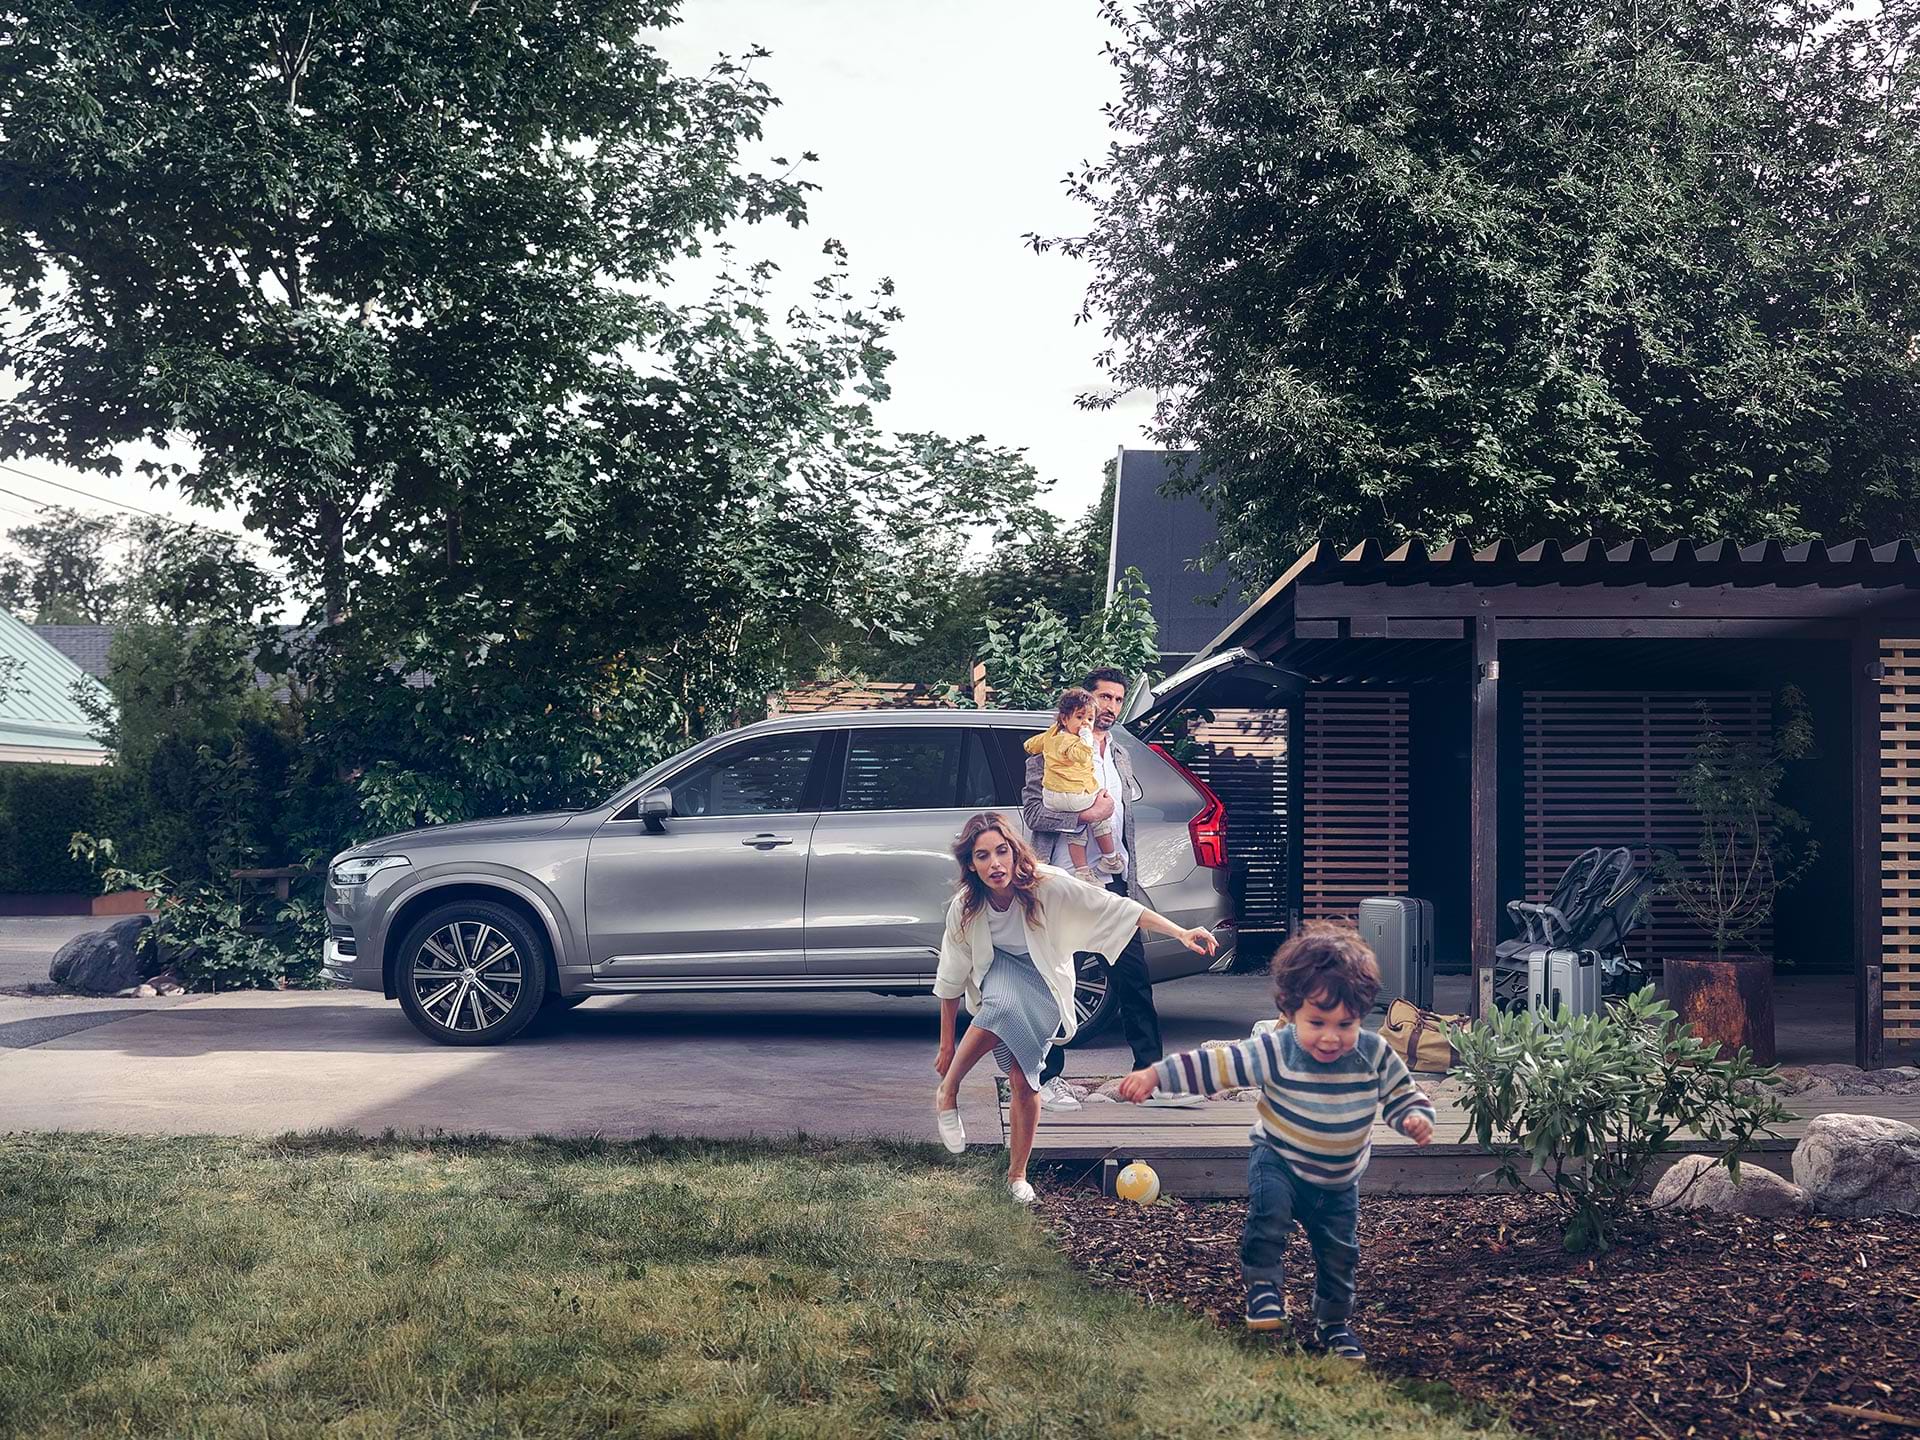 As a suburban family prepares for a trip in their Volvo SUV, a child runs across the yard chased by his mother.